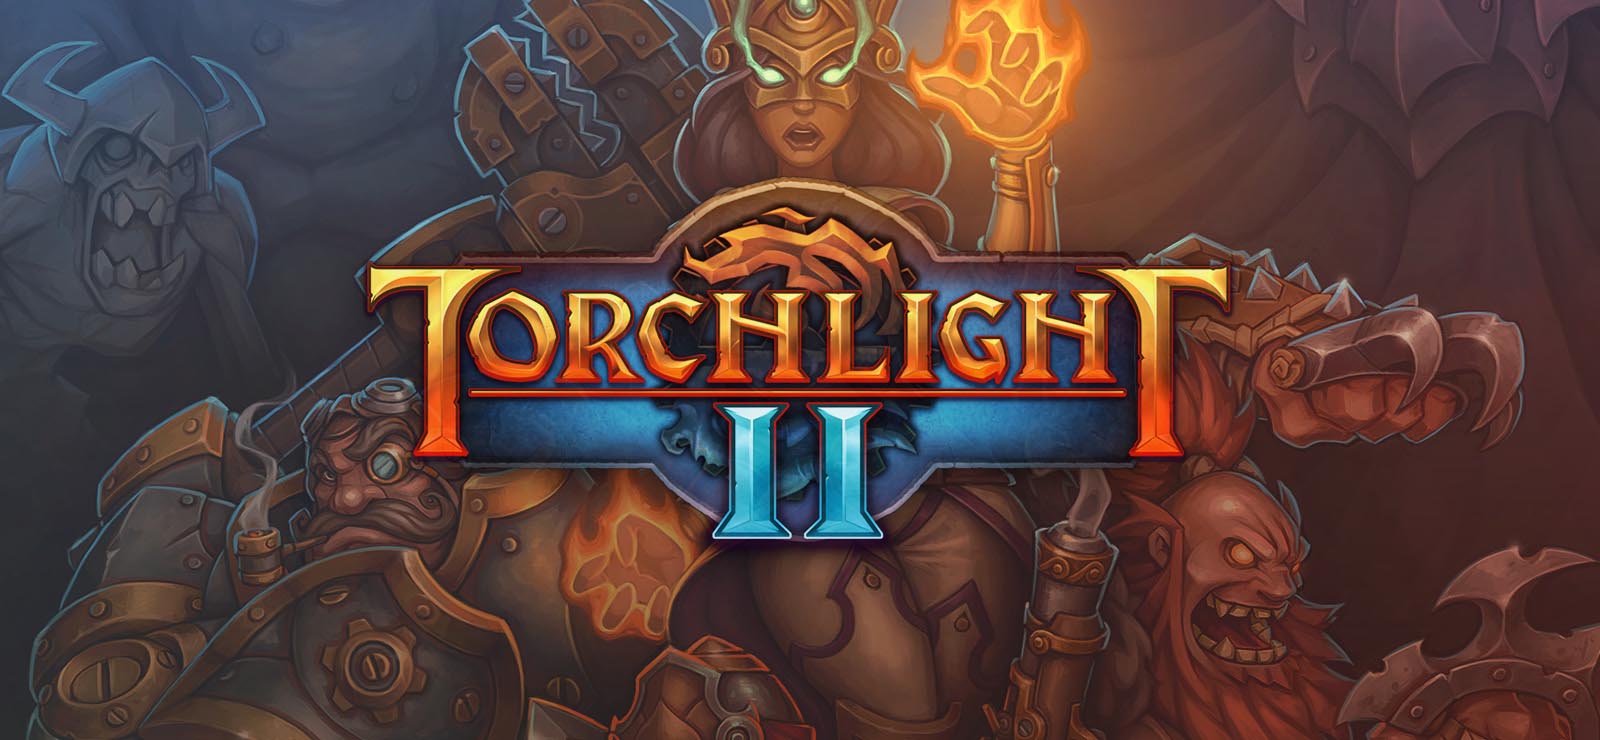 torchlight 3 switch physical